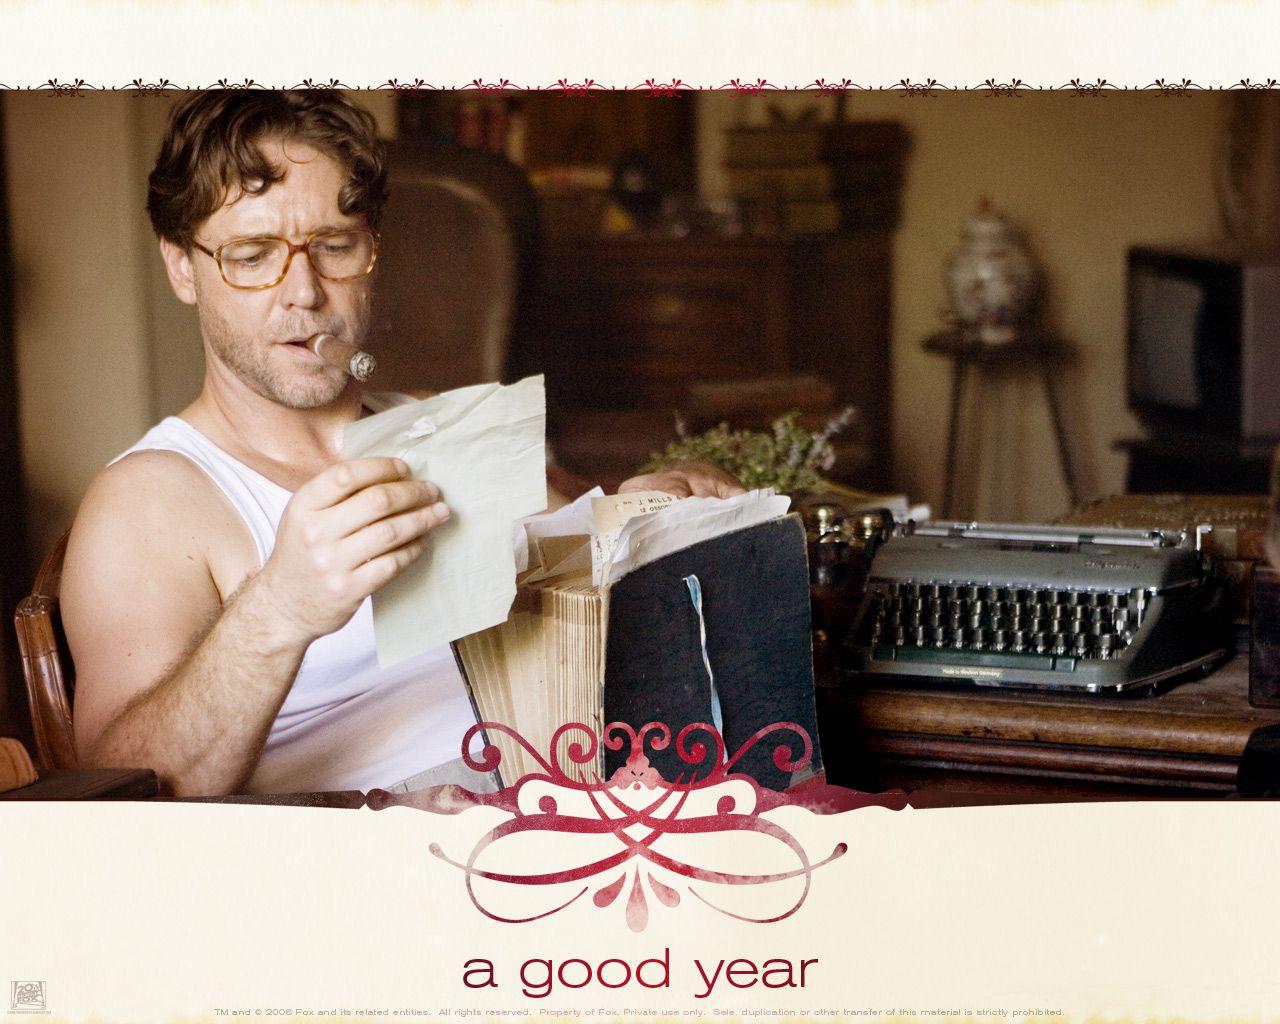 Russell Crowe Crowe in A Good Year Wallpaper 11 800x600